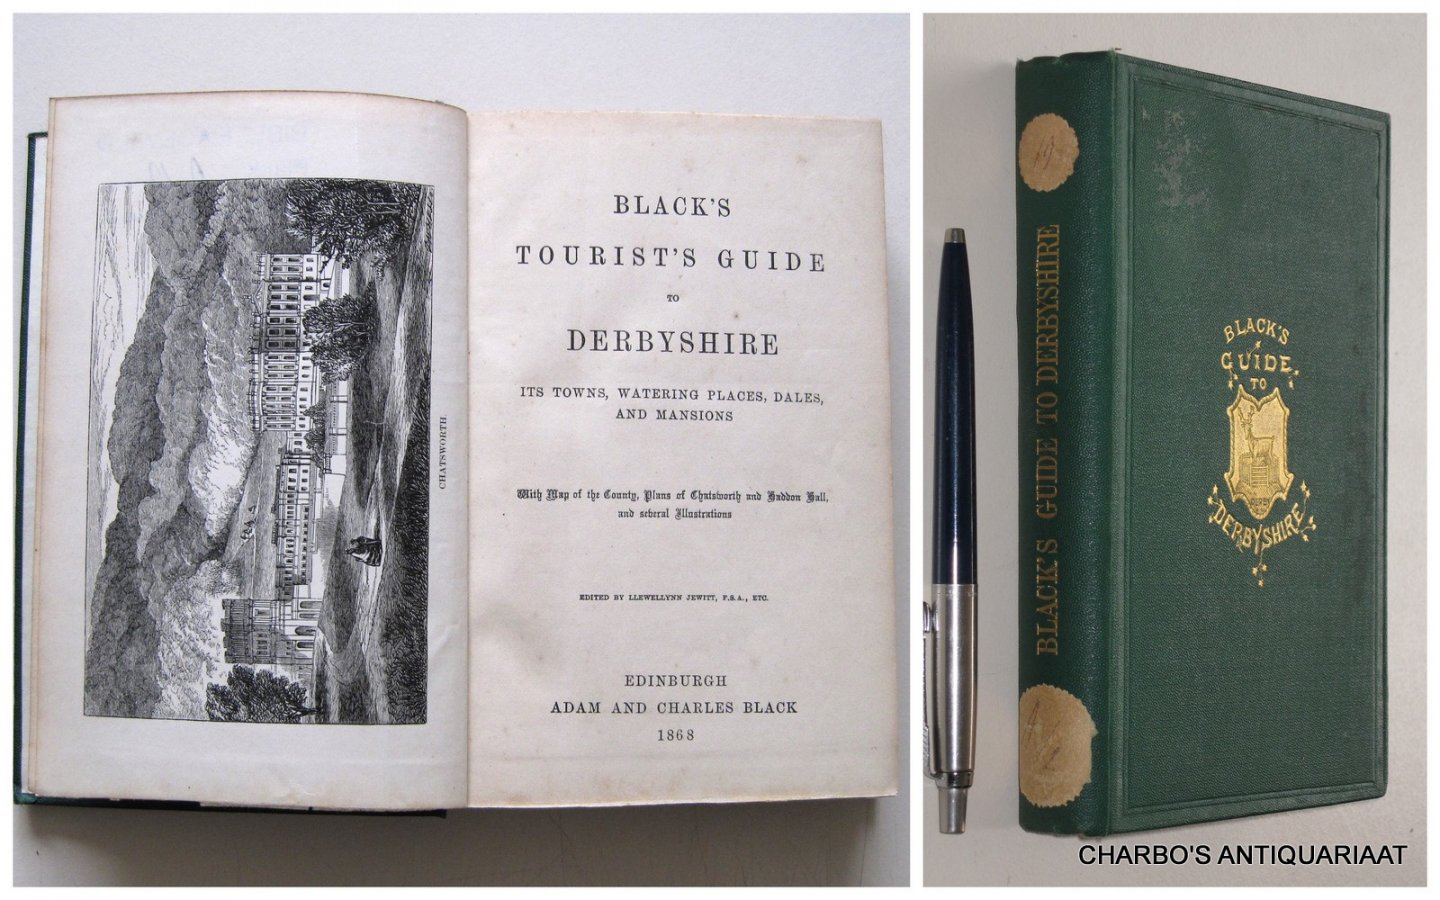 JEWITT, LLEWELLYNN (ed.), - Black's tourist's guide to Derbyshire; its towns, watering places, dales, and mansions.